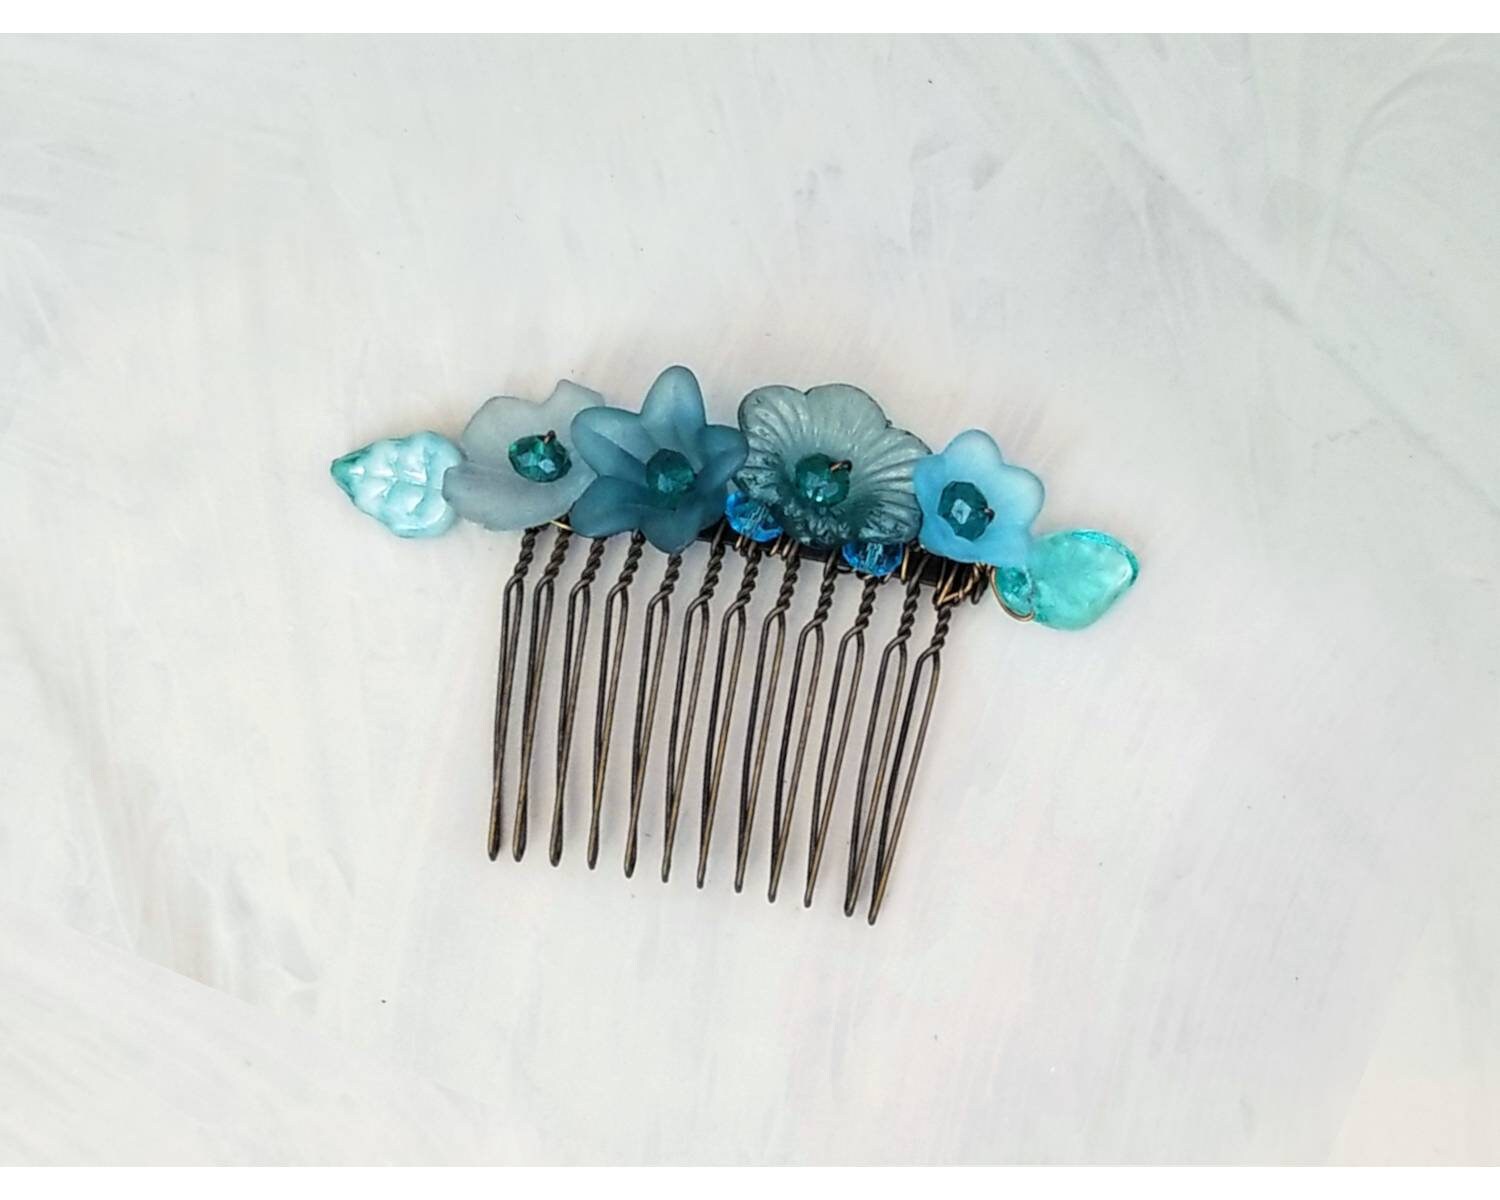 Wire Wrapped Lucite Flower Comb in Aqua Blue, Bridesmaid, Wedding, Floral, Garden, Party, Boho, Bohemian, Choice of Colors and Metals